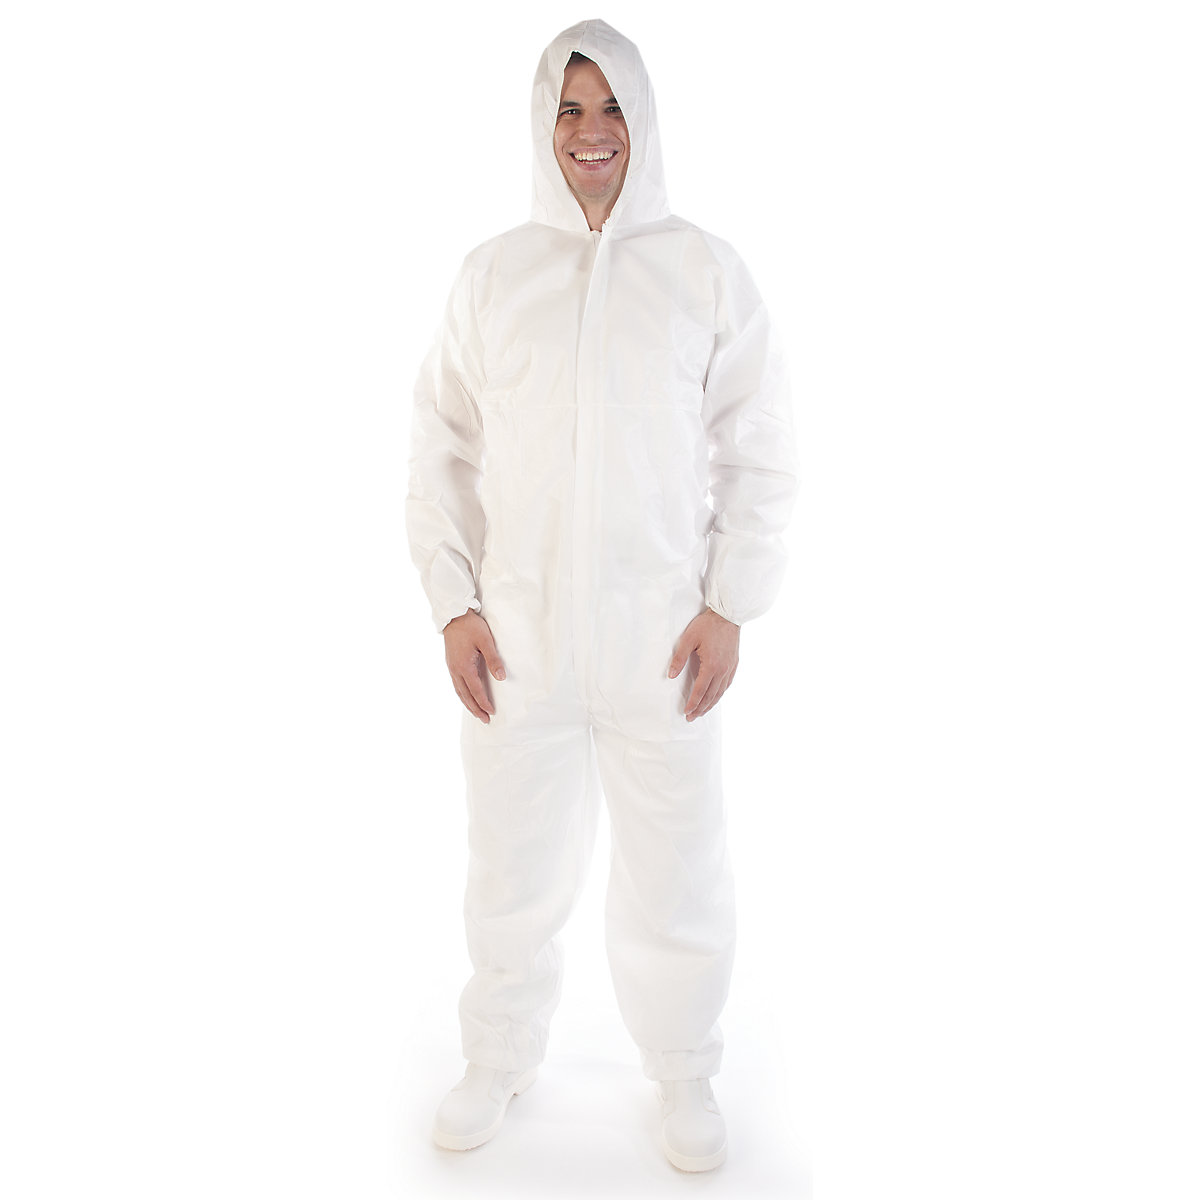 MICROPOROUS overalls